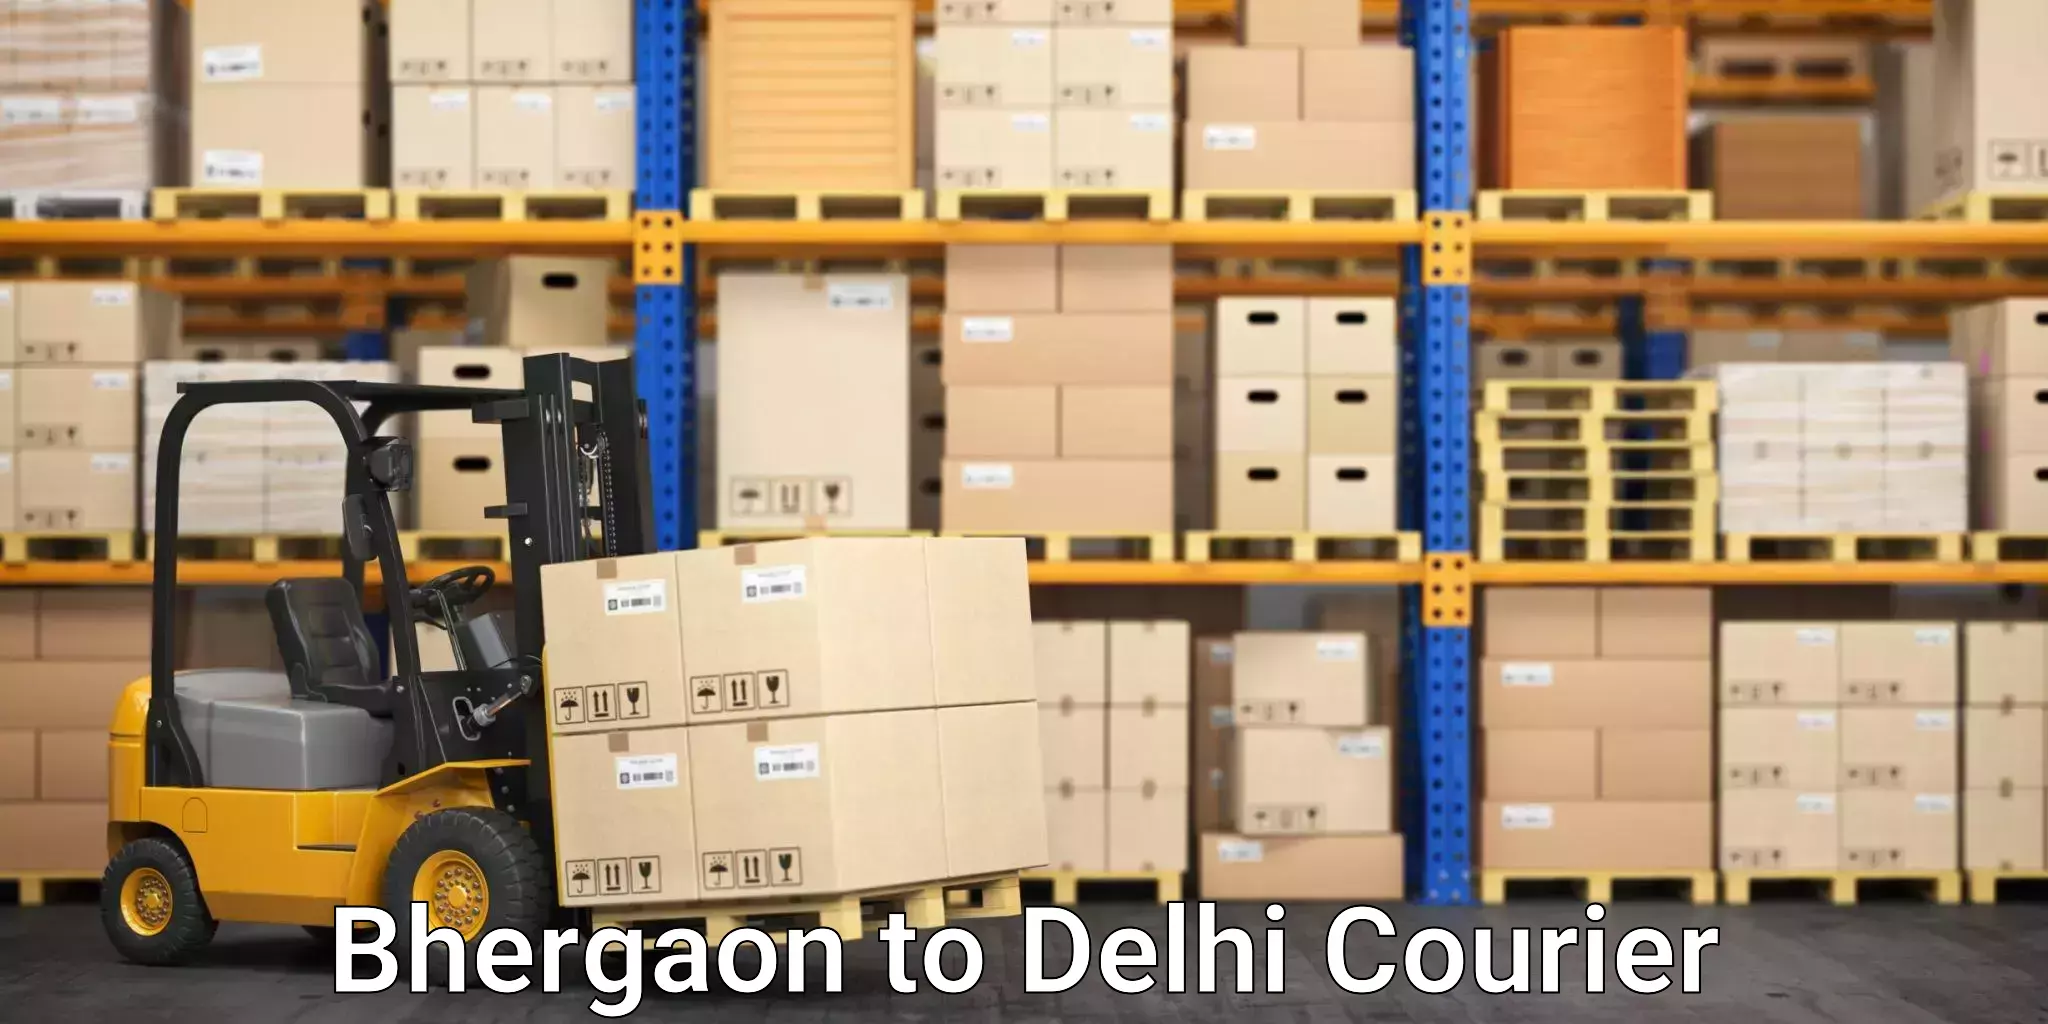 Flexible delivery schedules Bhergaon to NCR